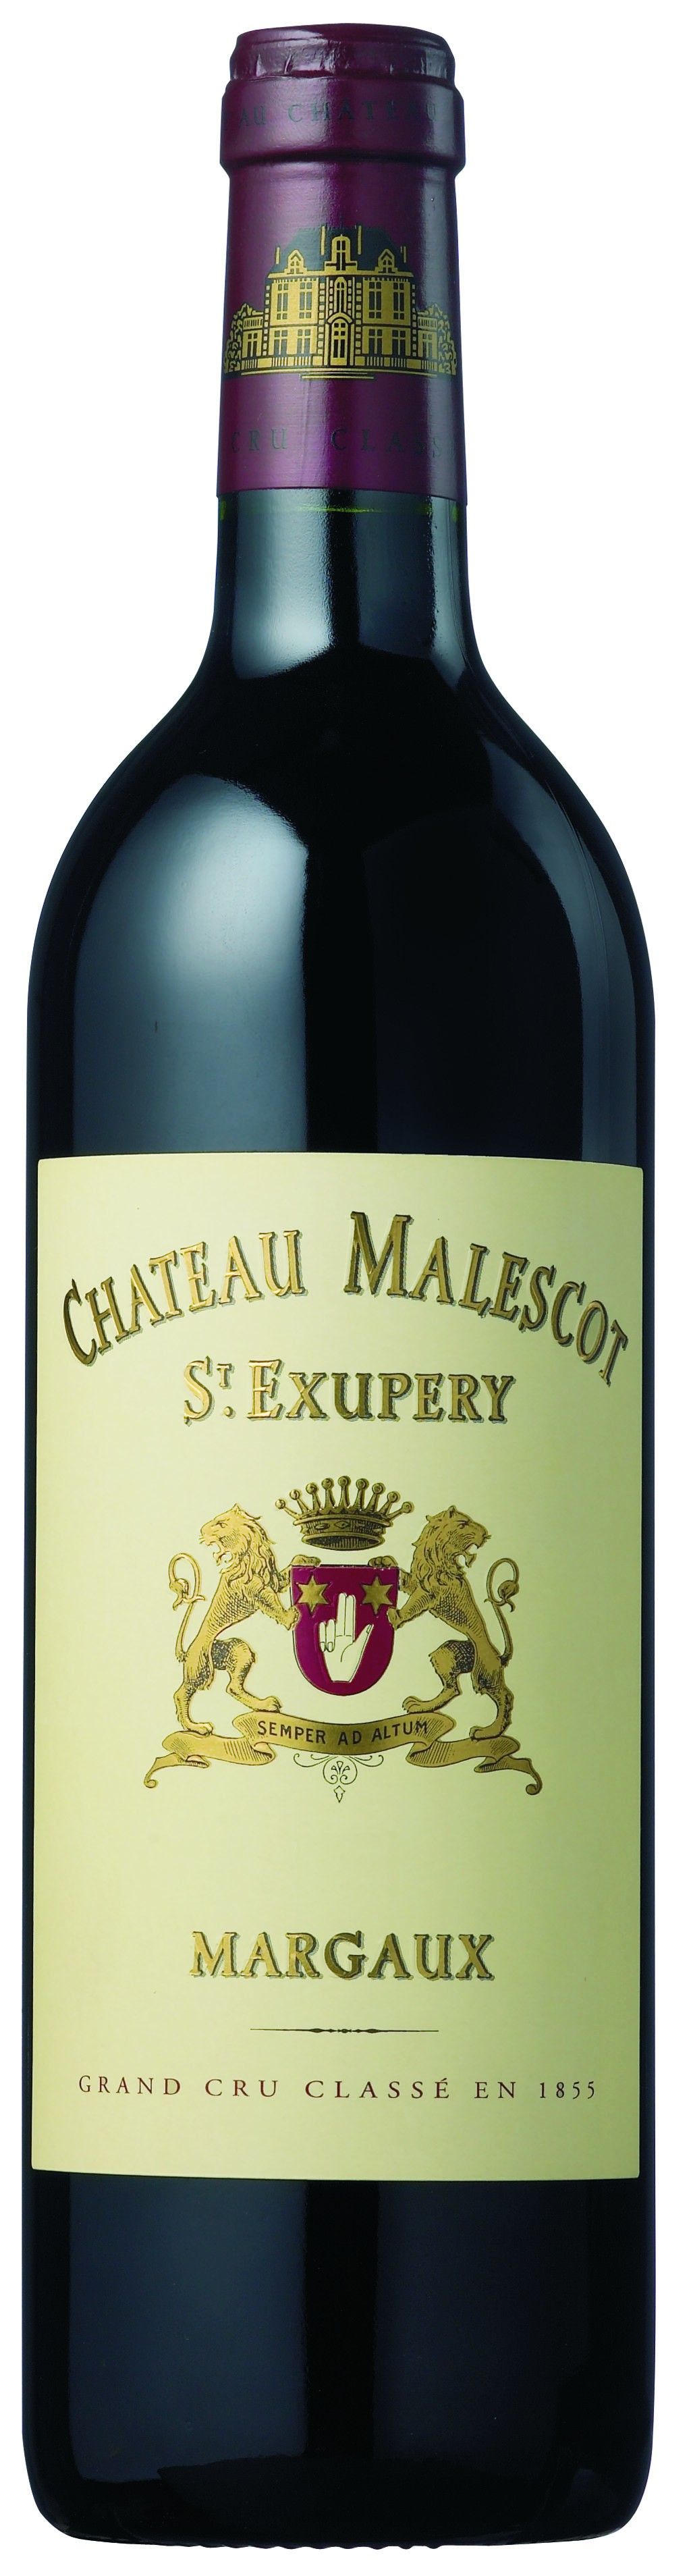 Chateau Malescot-St-Exupery, 2013